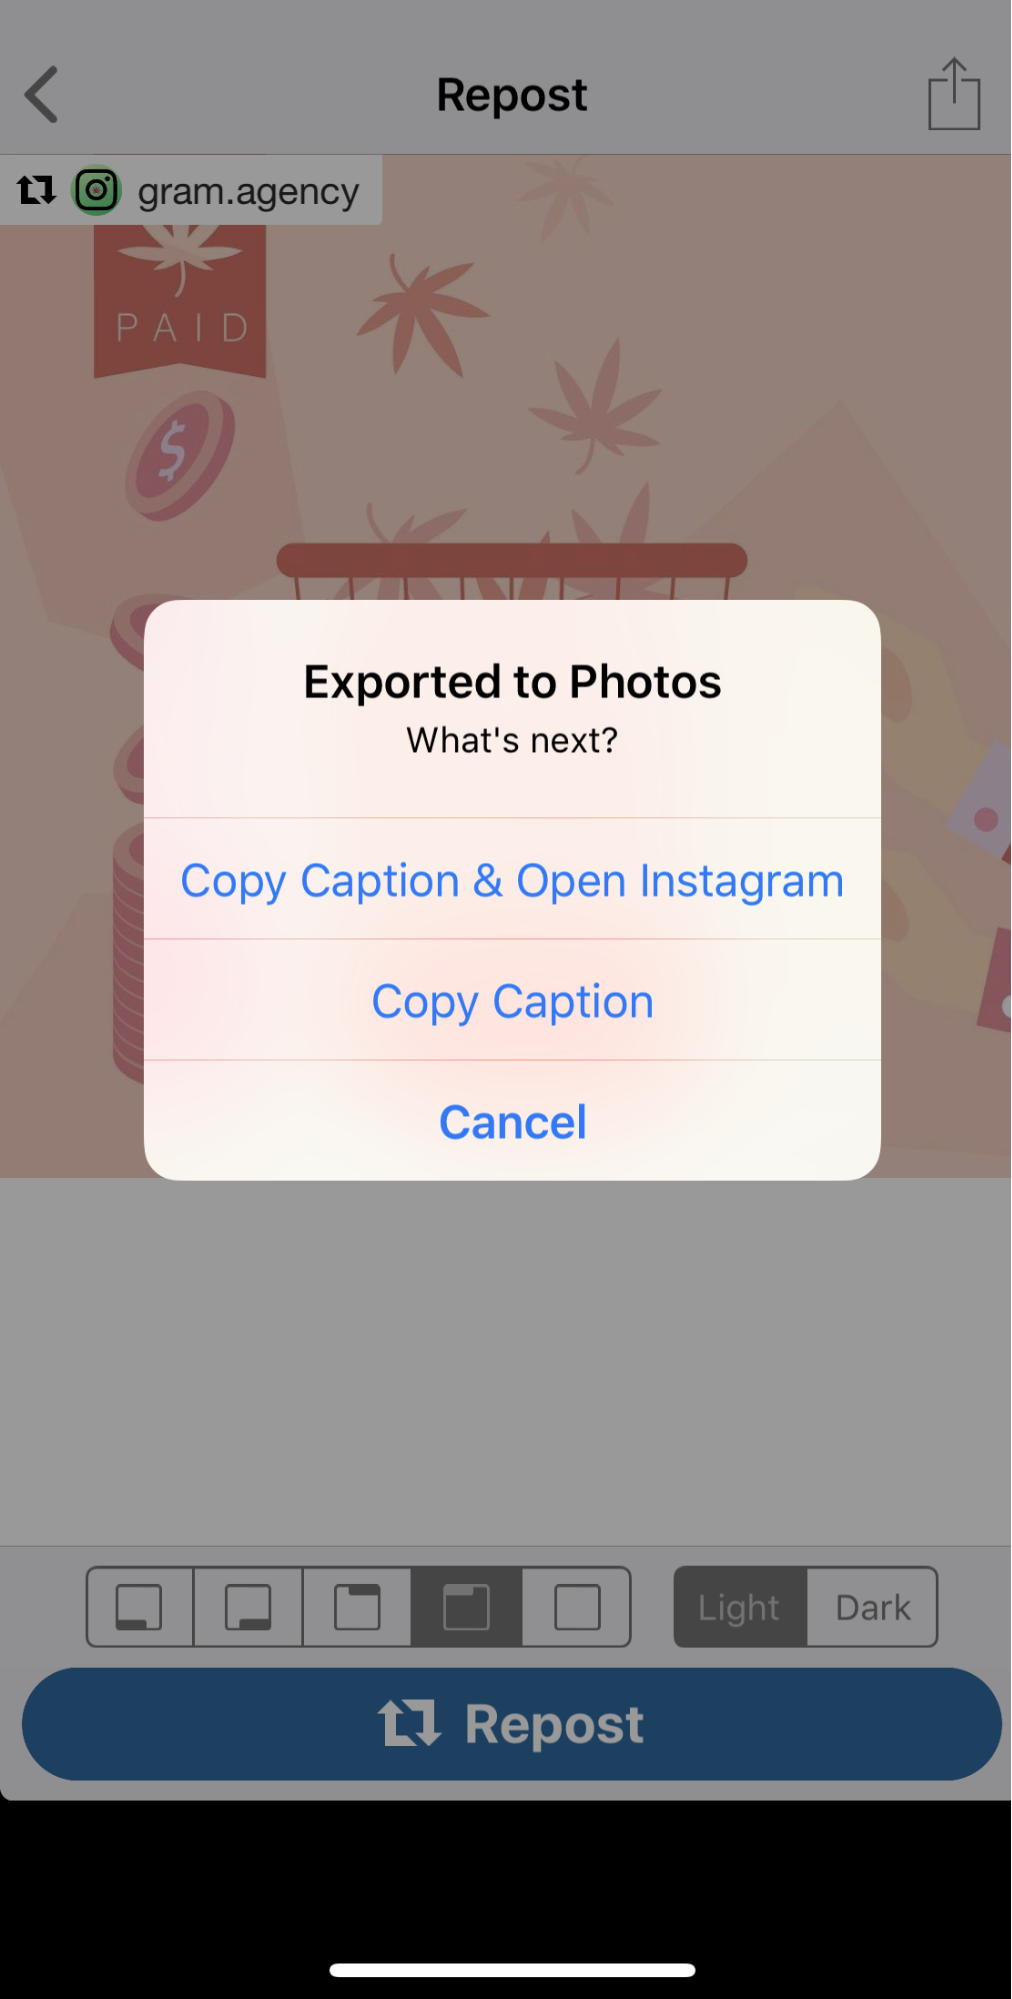 How to repost on Instagram step 3